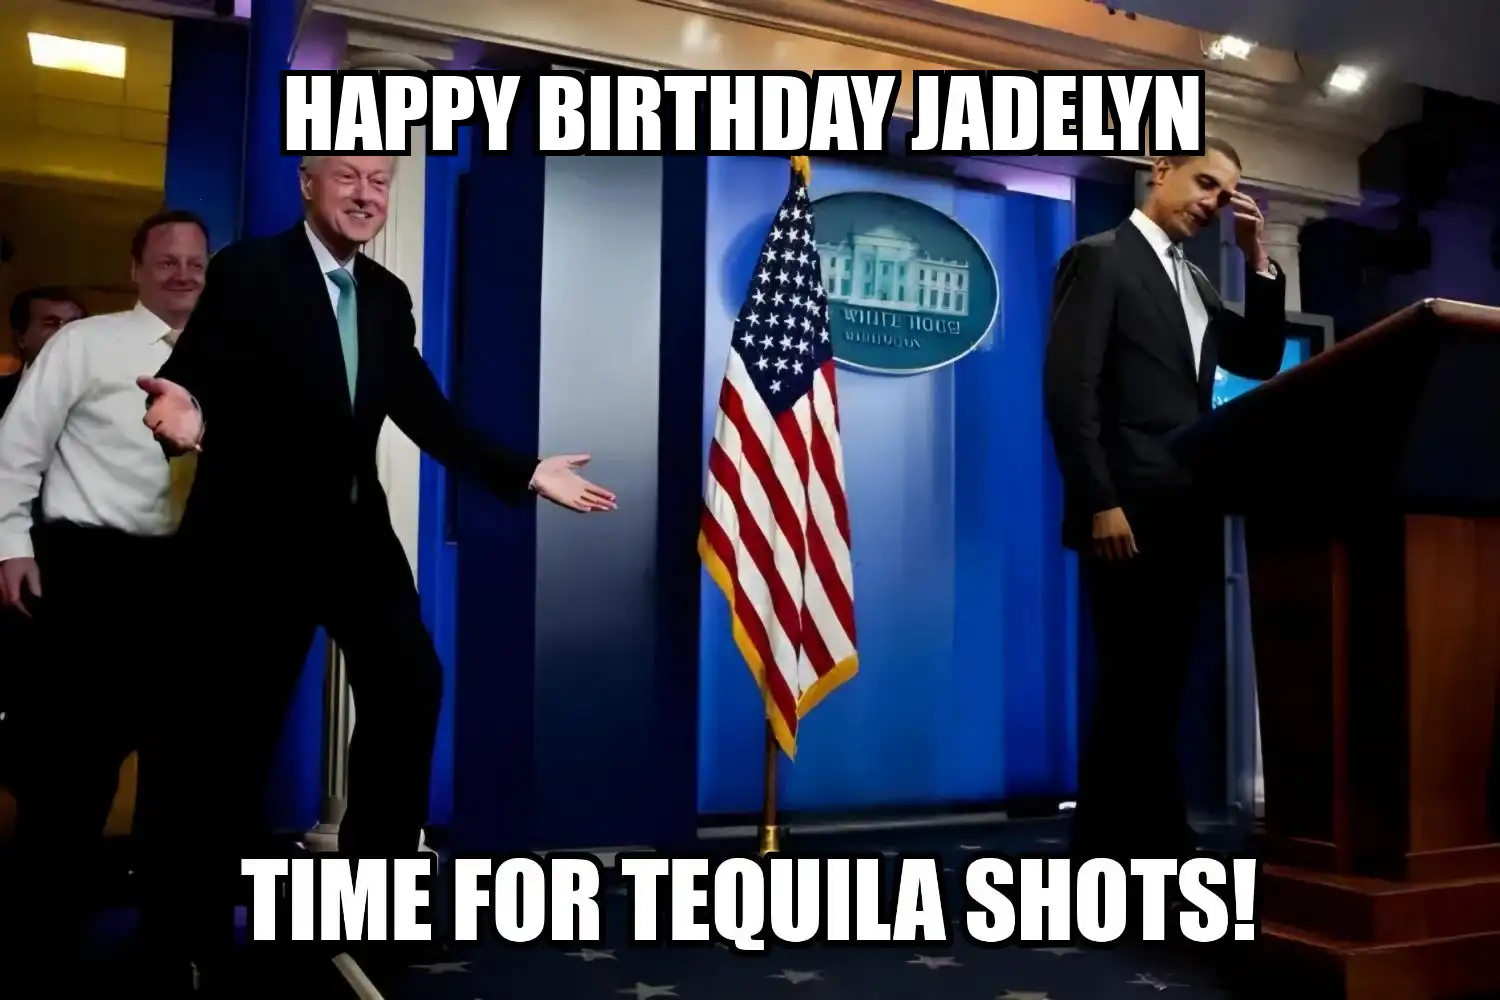 Happy Birthday Jadelyn Time For Tequila Shots Memes